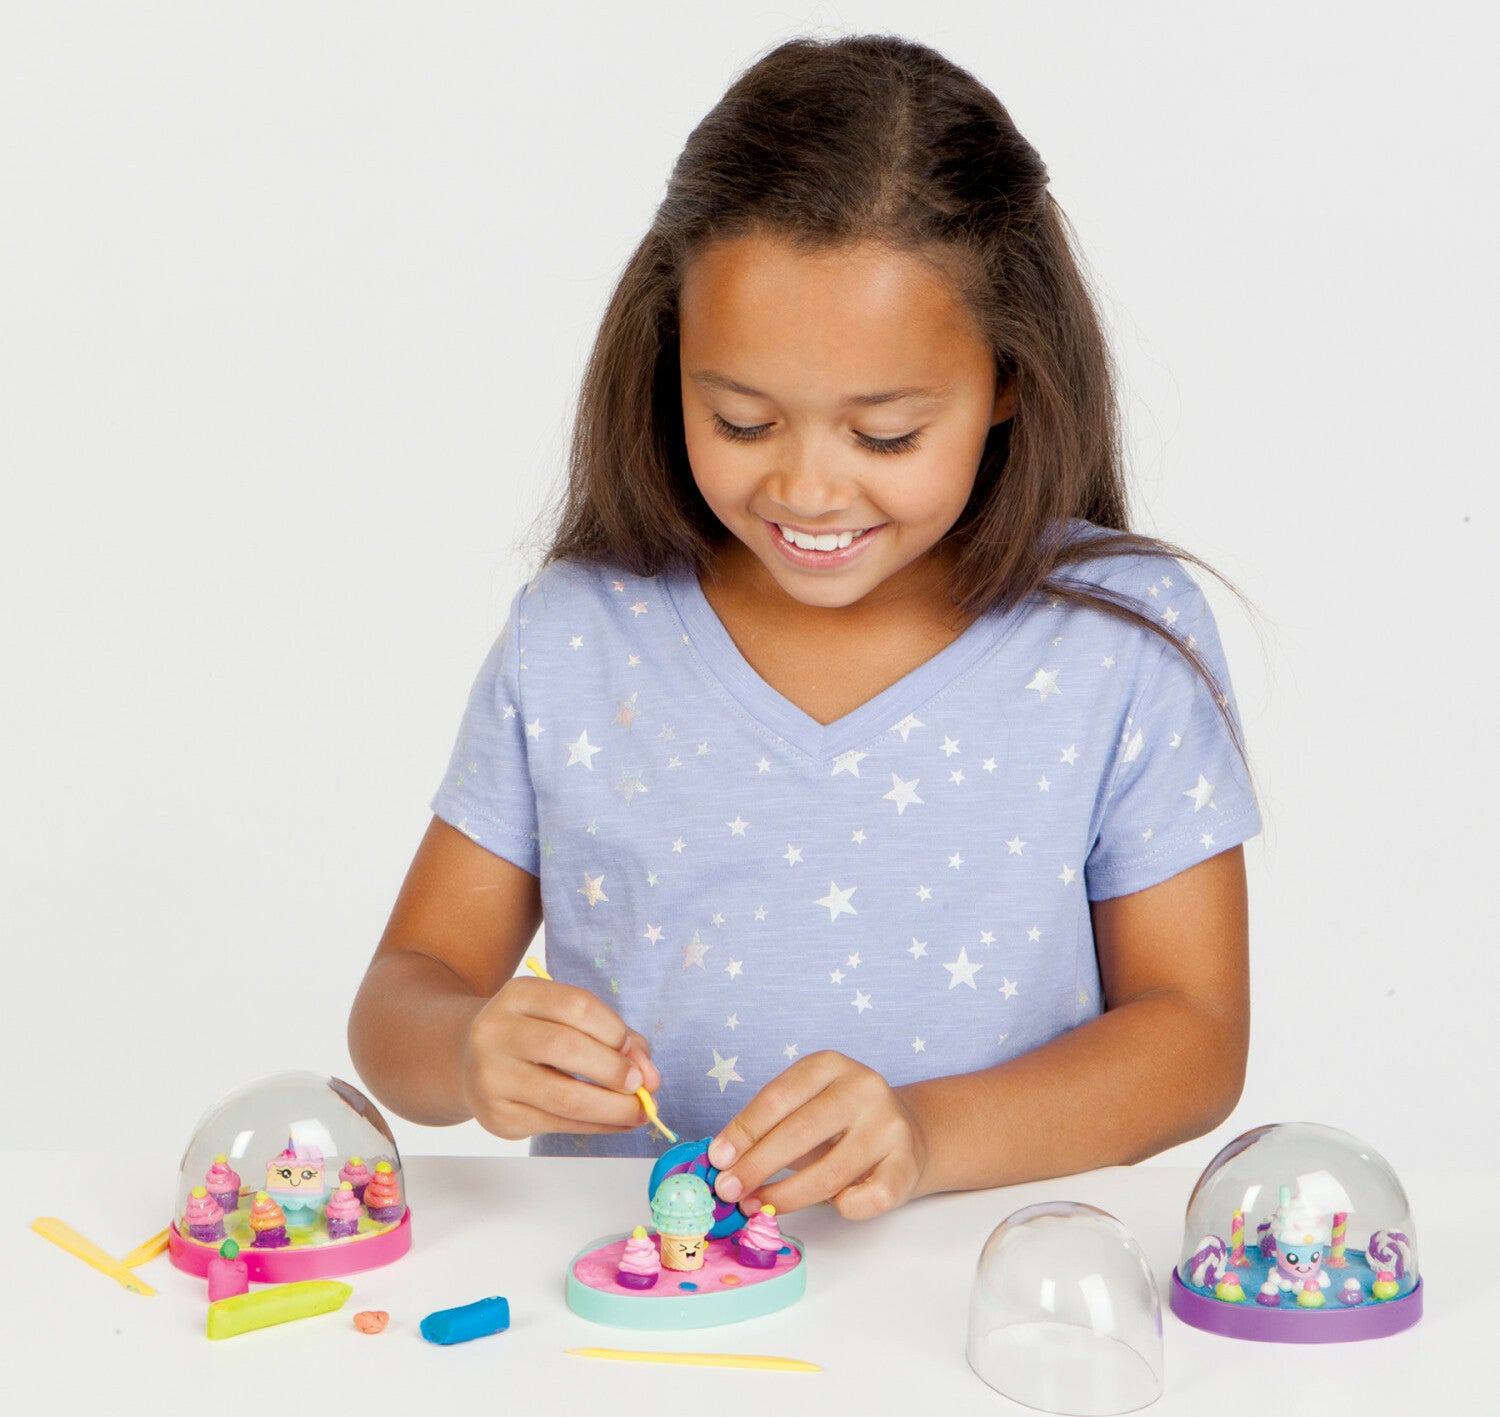 Make Your Own Water Globes – Sweet Treats